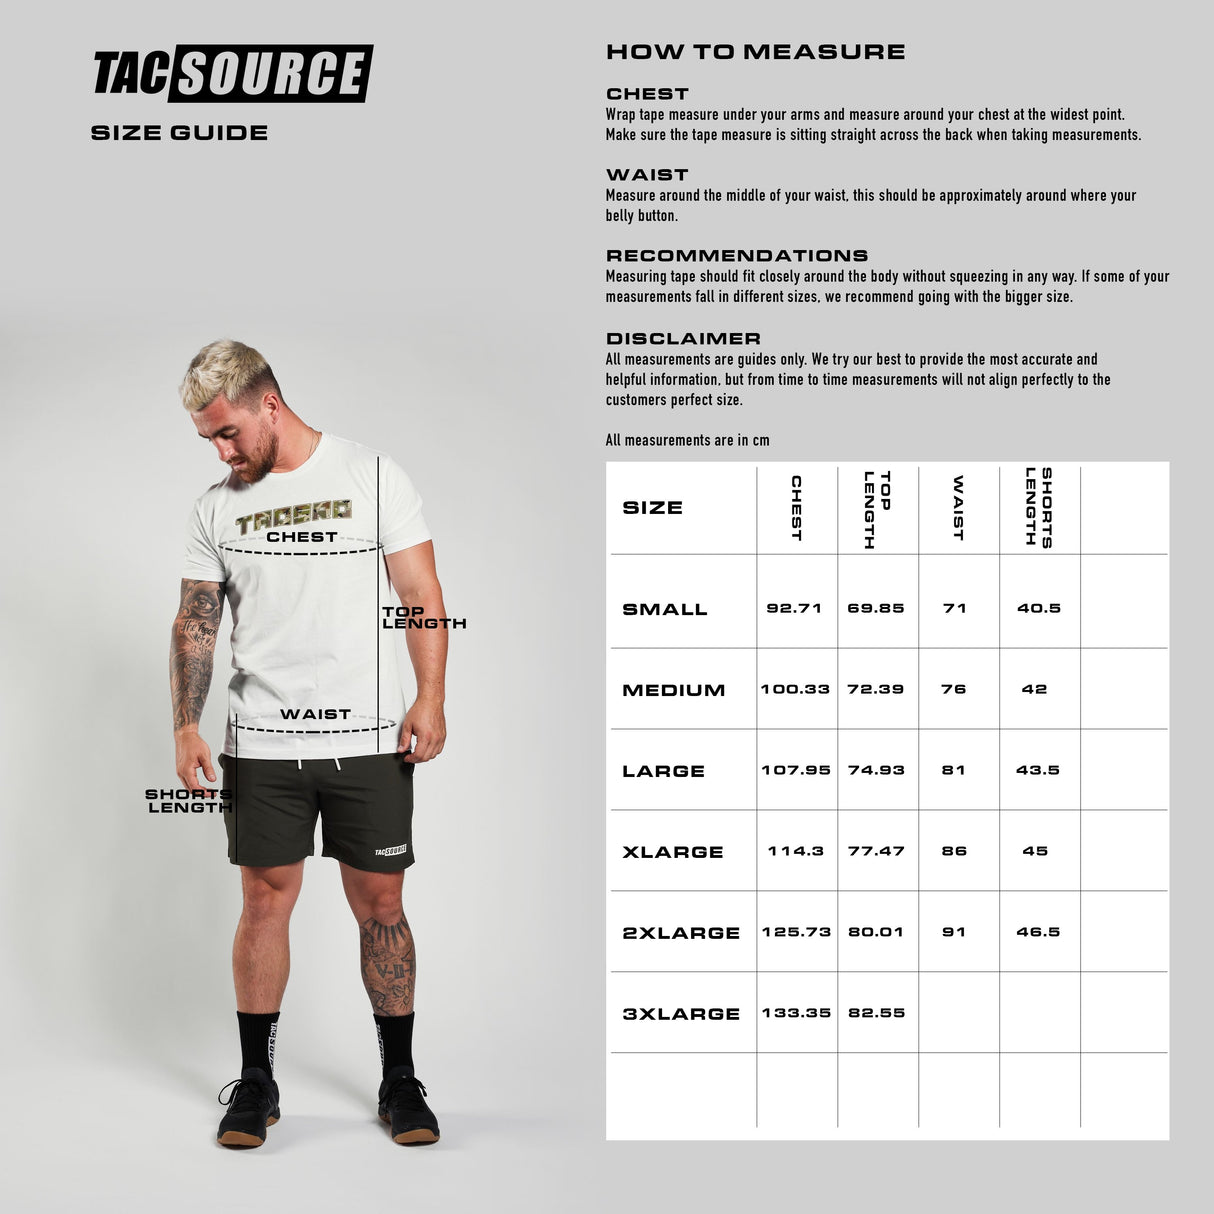 TacSource 100% Cotton Loose Fit Undergear Tee - 2 X Pack - Dark Navy